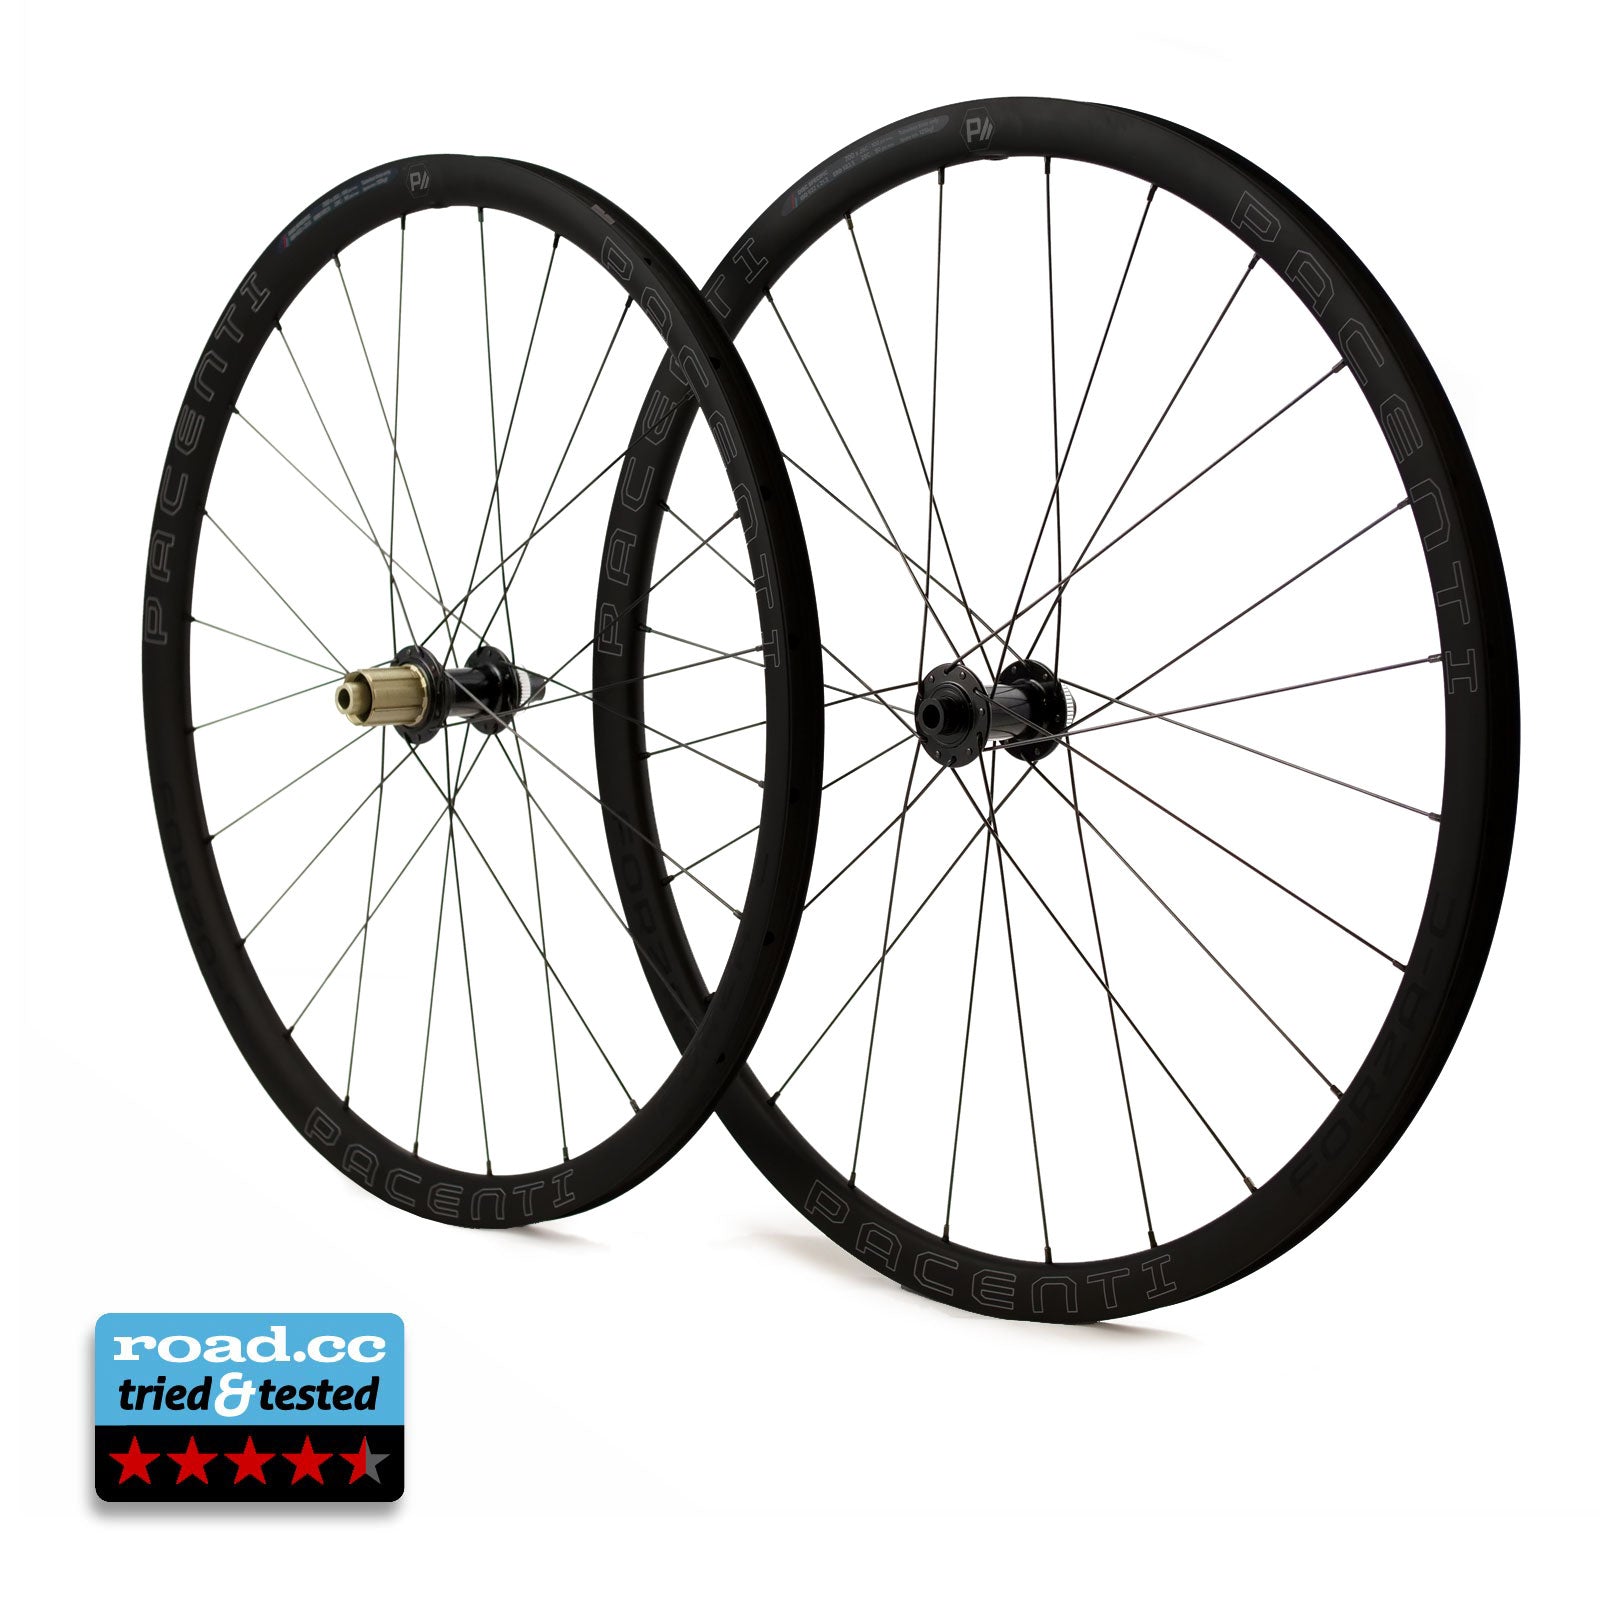 FORZA-C 30MM DISC CLINCHER WHEELS 700C Campagnolo